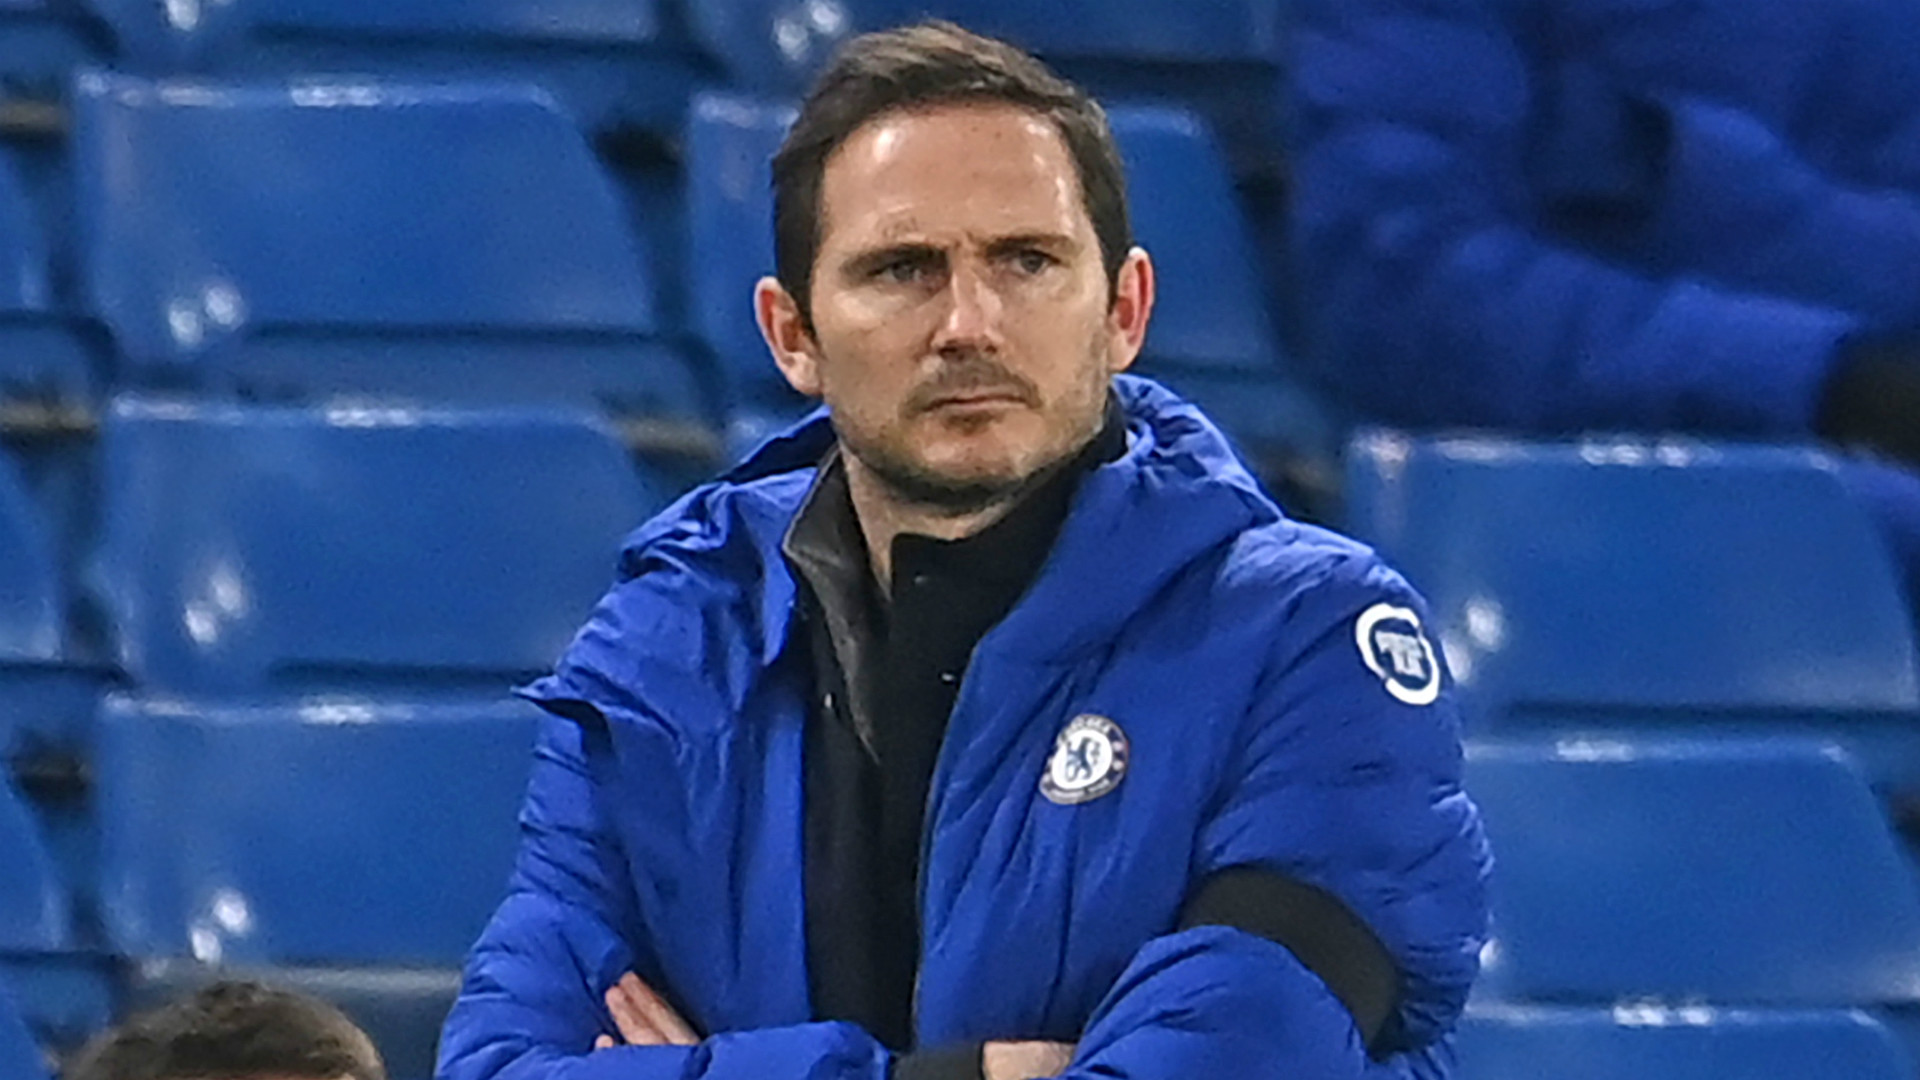 Lampard 'walking on eggshells' at Chelsea & Werner 'can't play upfront on his own', says Cascarino